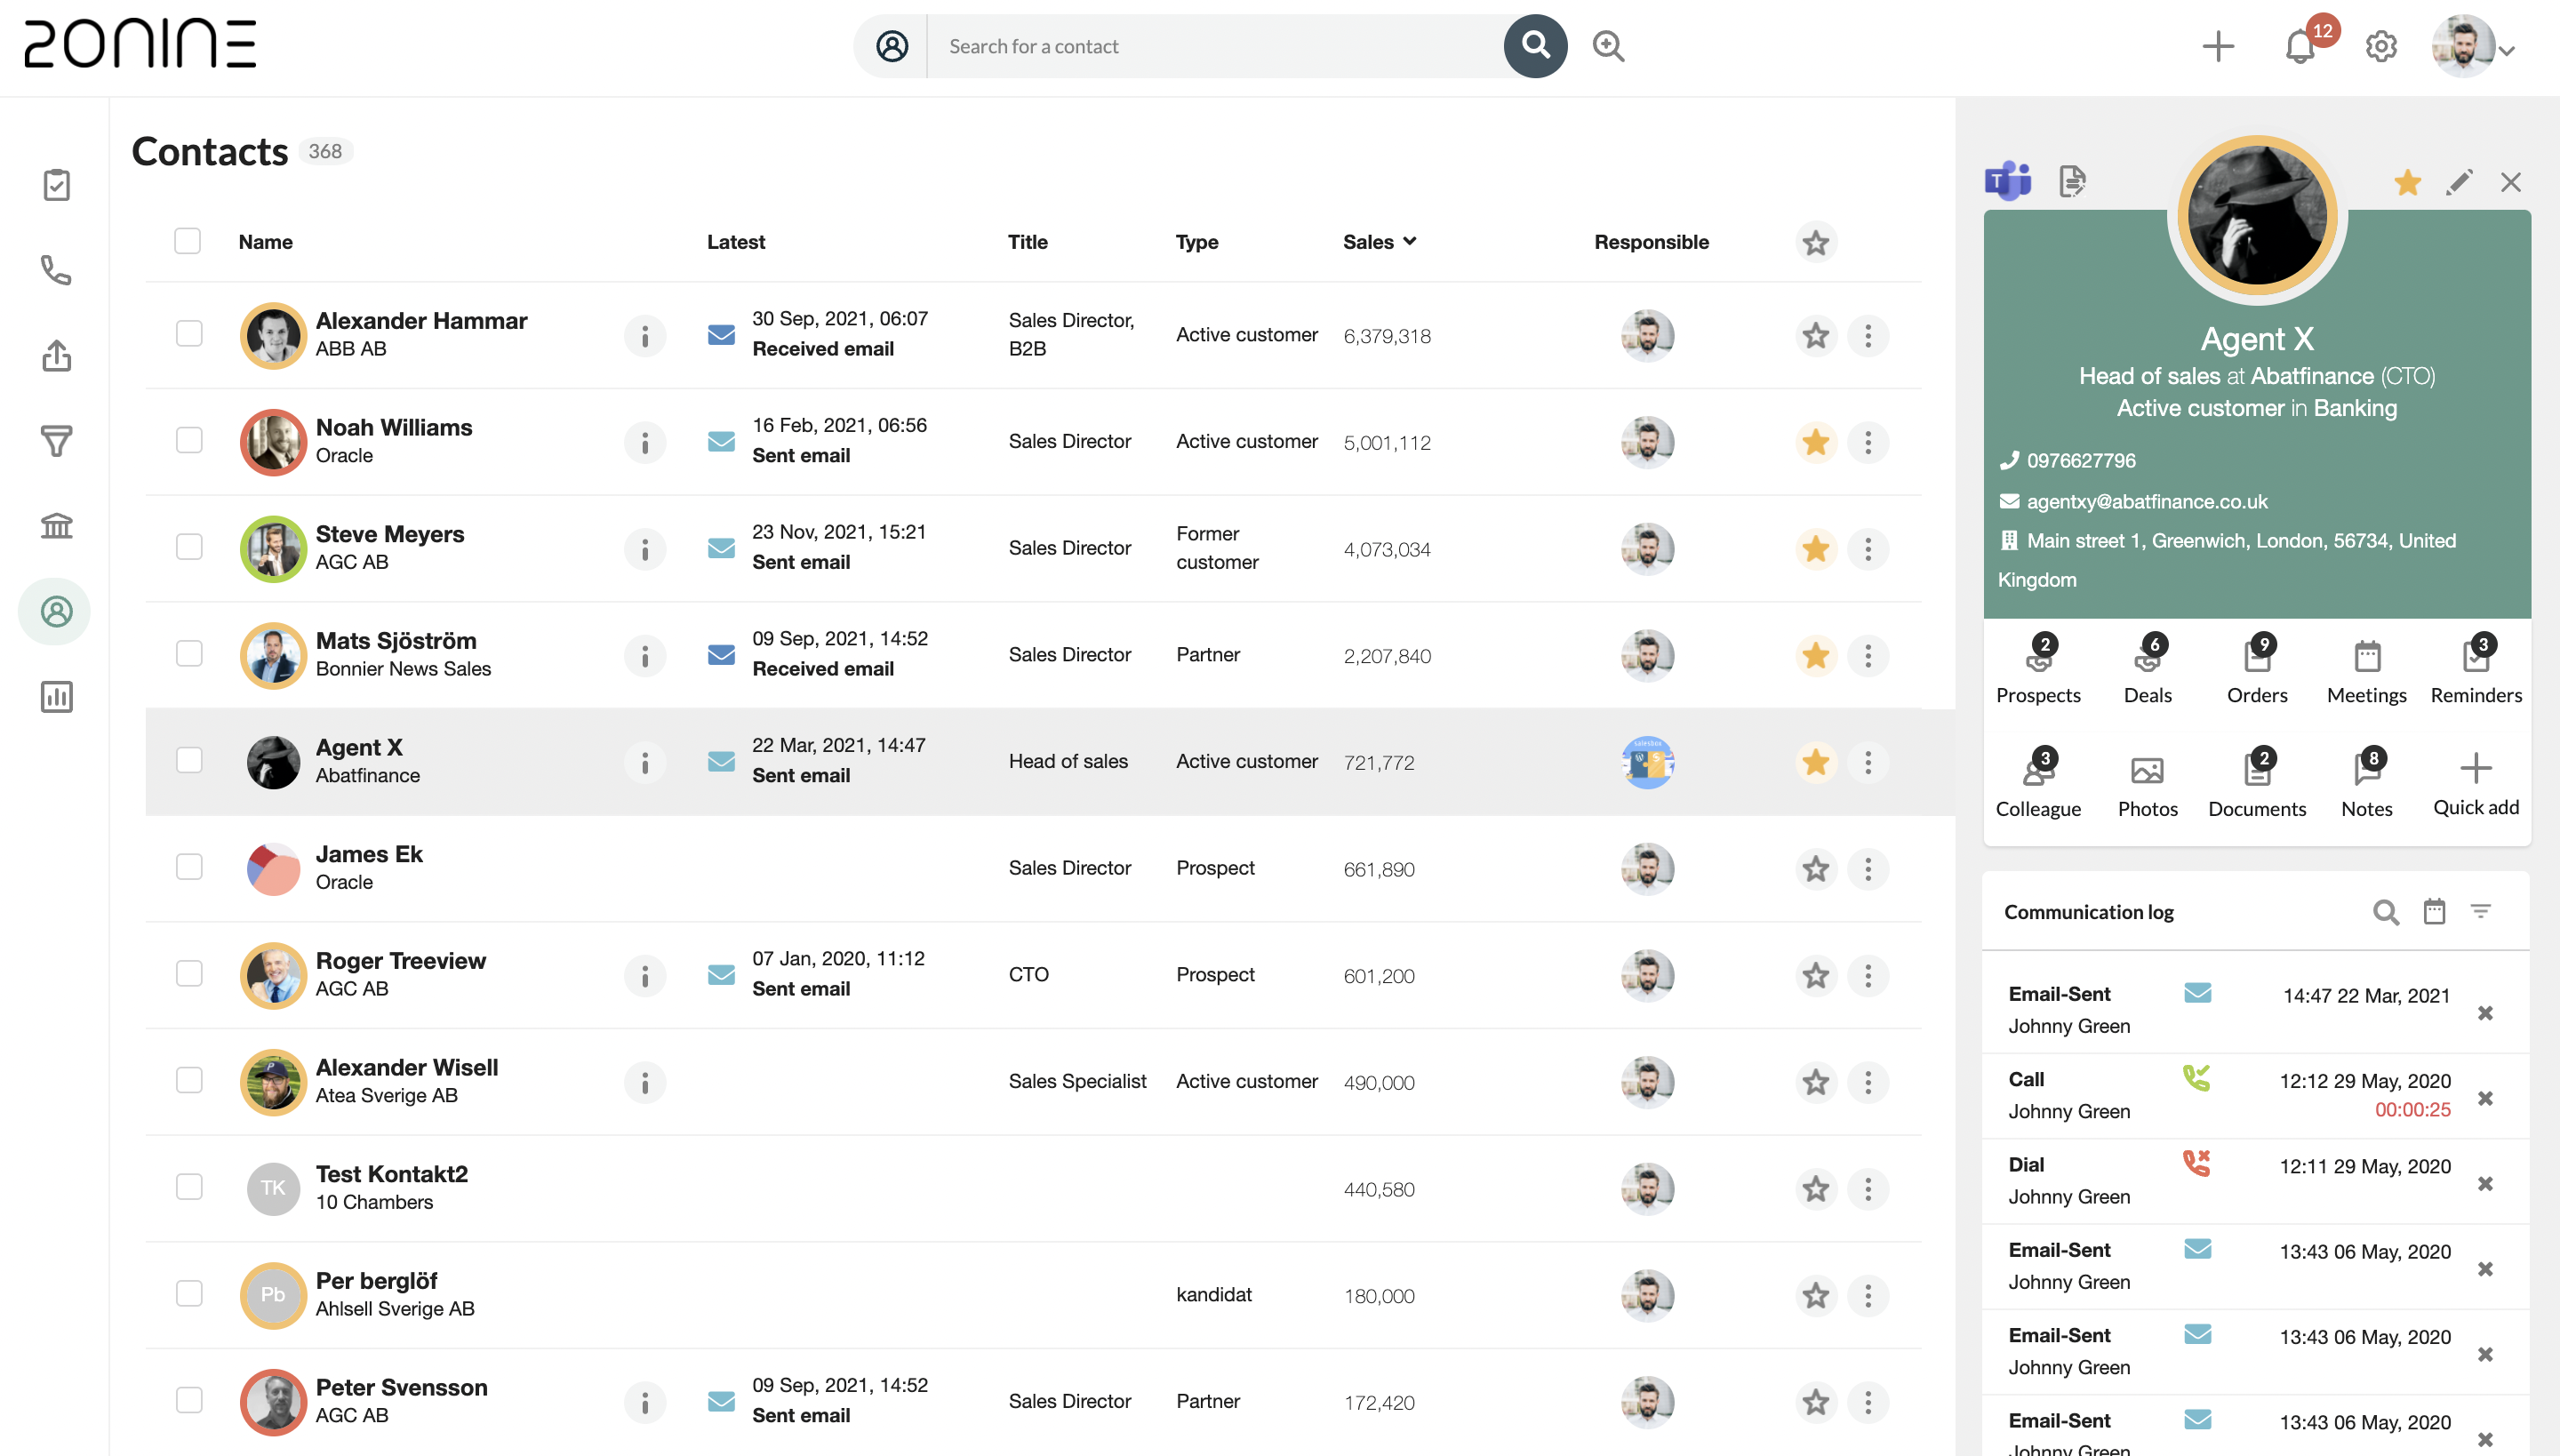 20NINE Contact CRM - Manage all relations and communication. Categorise and search to build your focus groups. Replaces the need for spread sheets.